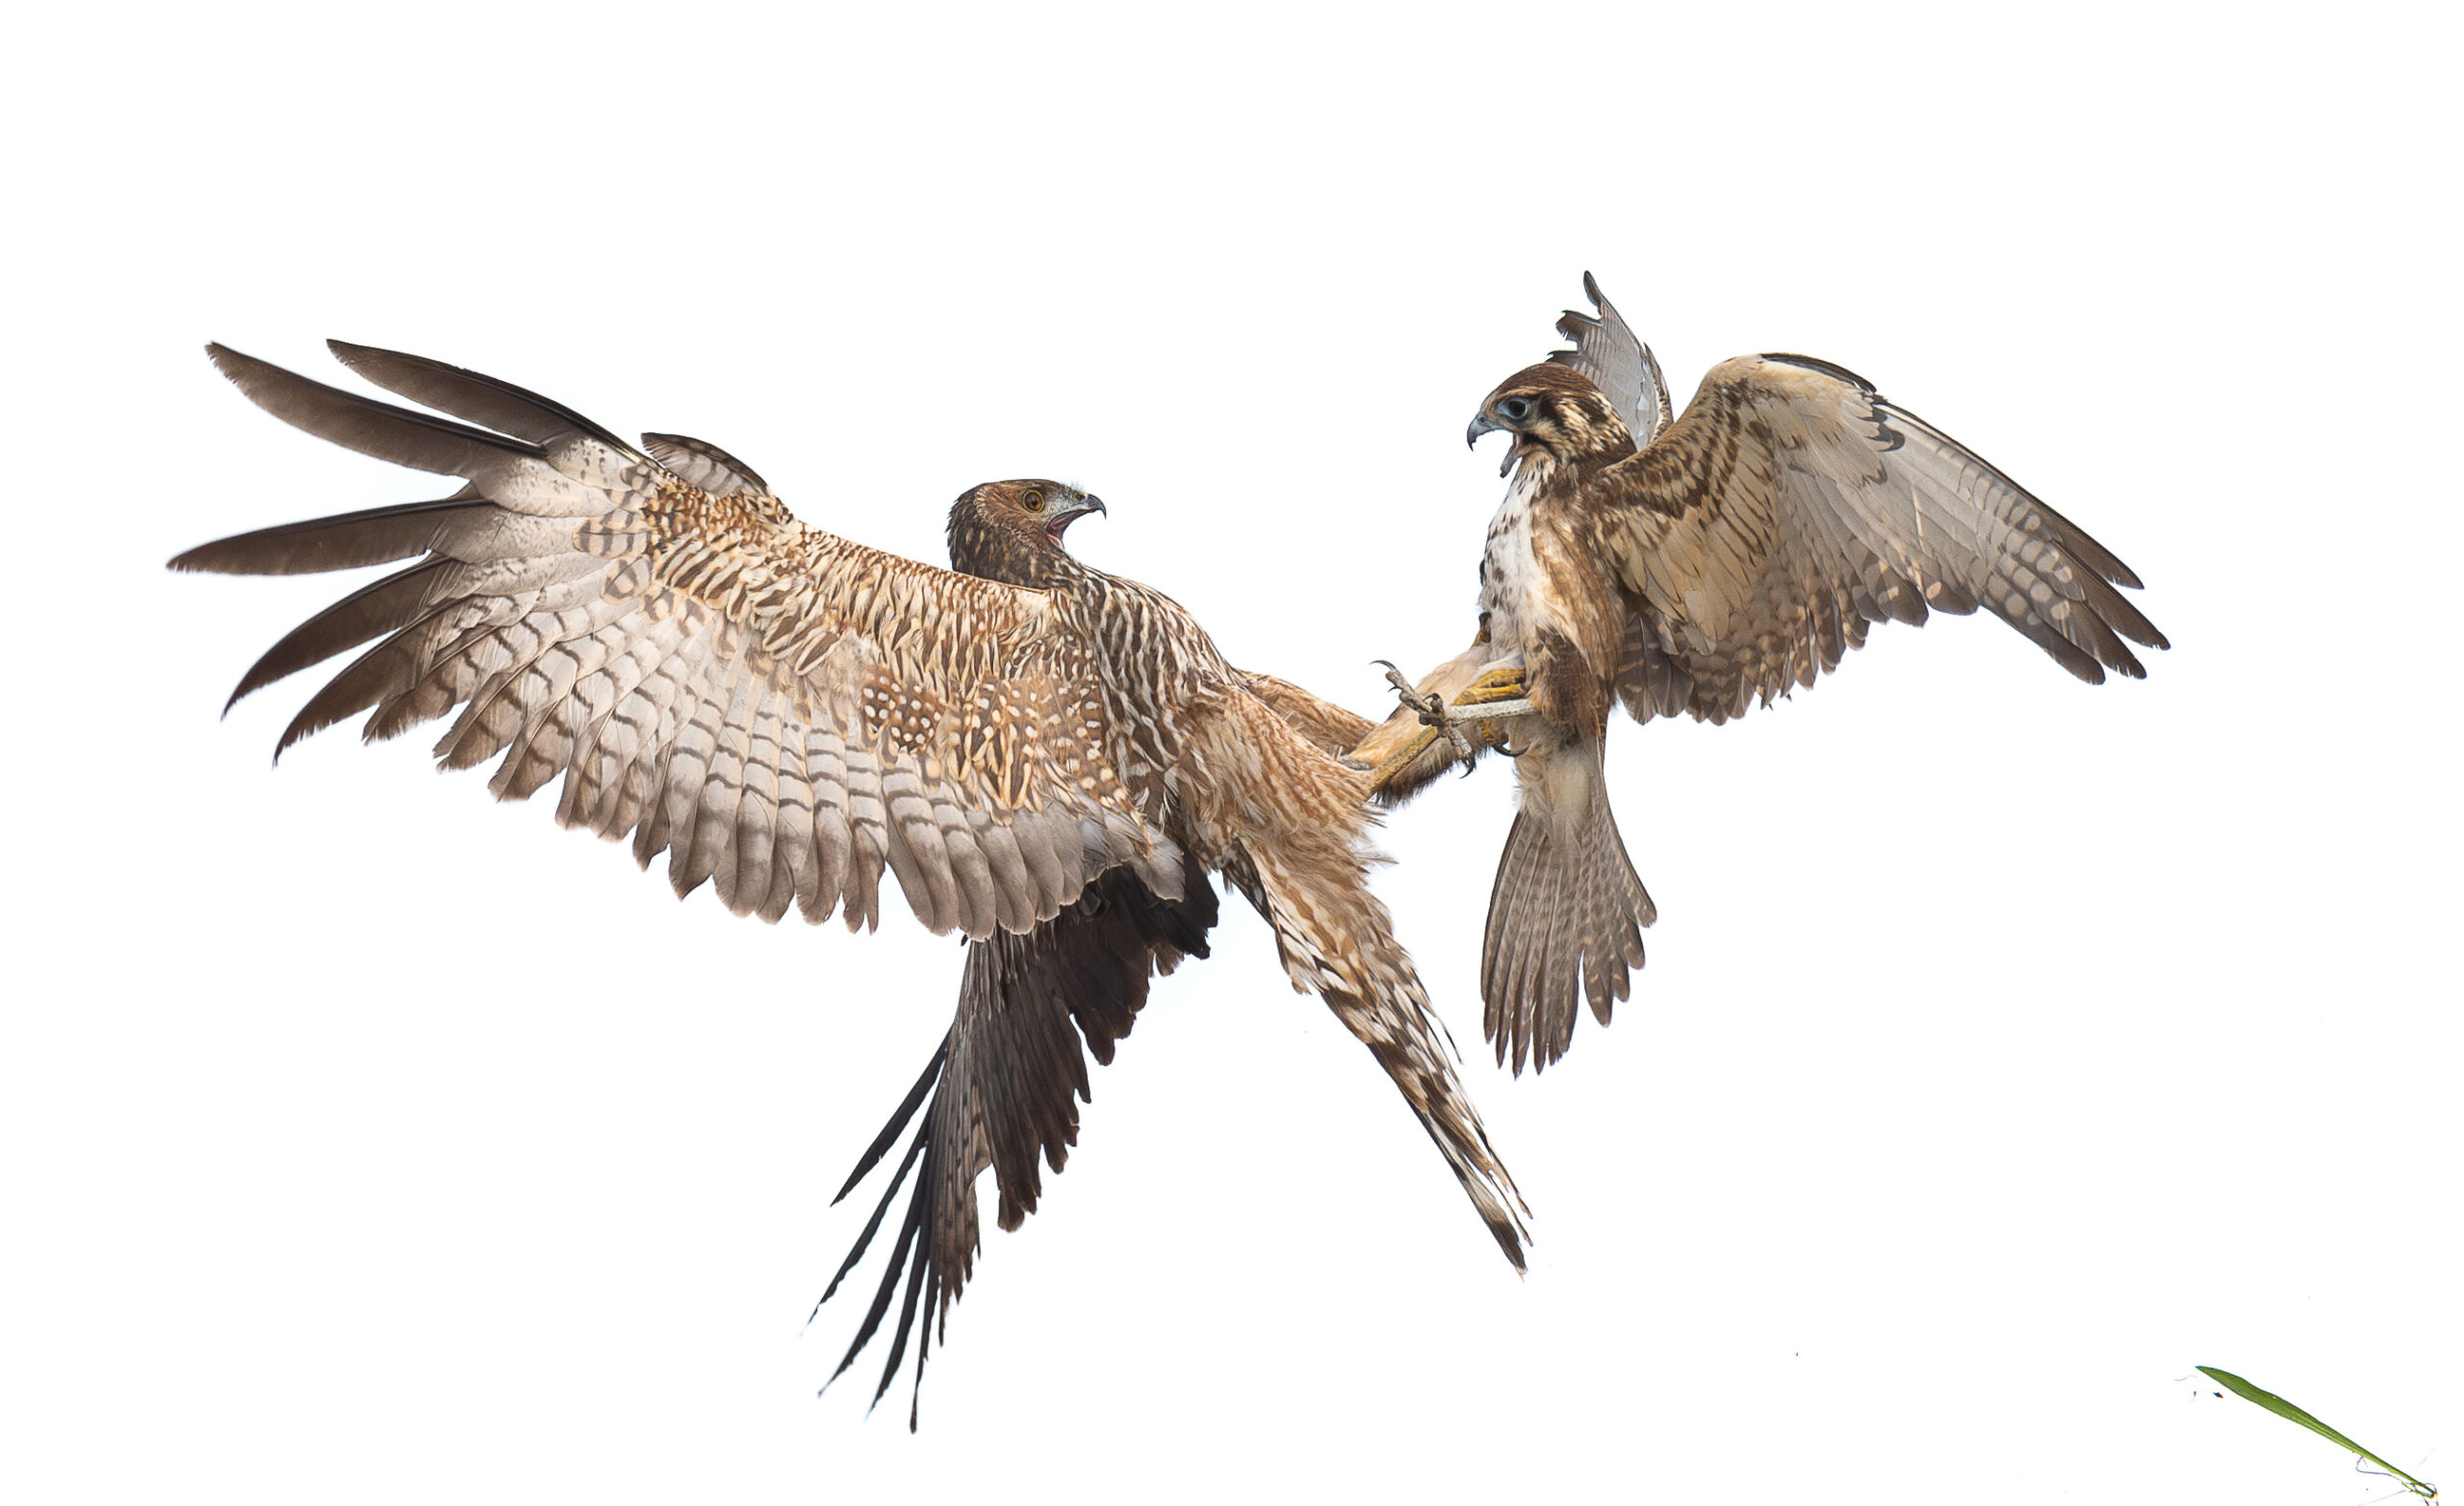 A much larger Spotted Harrier (left) fighting a Brown Falcon (right) in the air. Both birds have locked talons and beaks open as they fight over their prey.